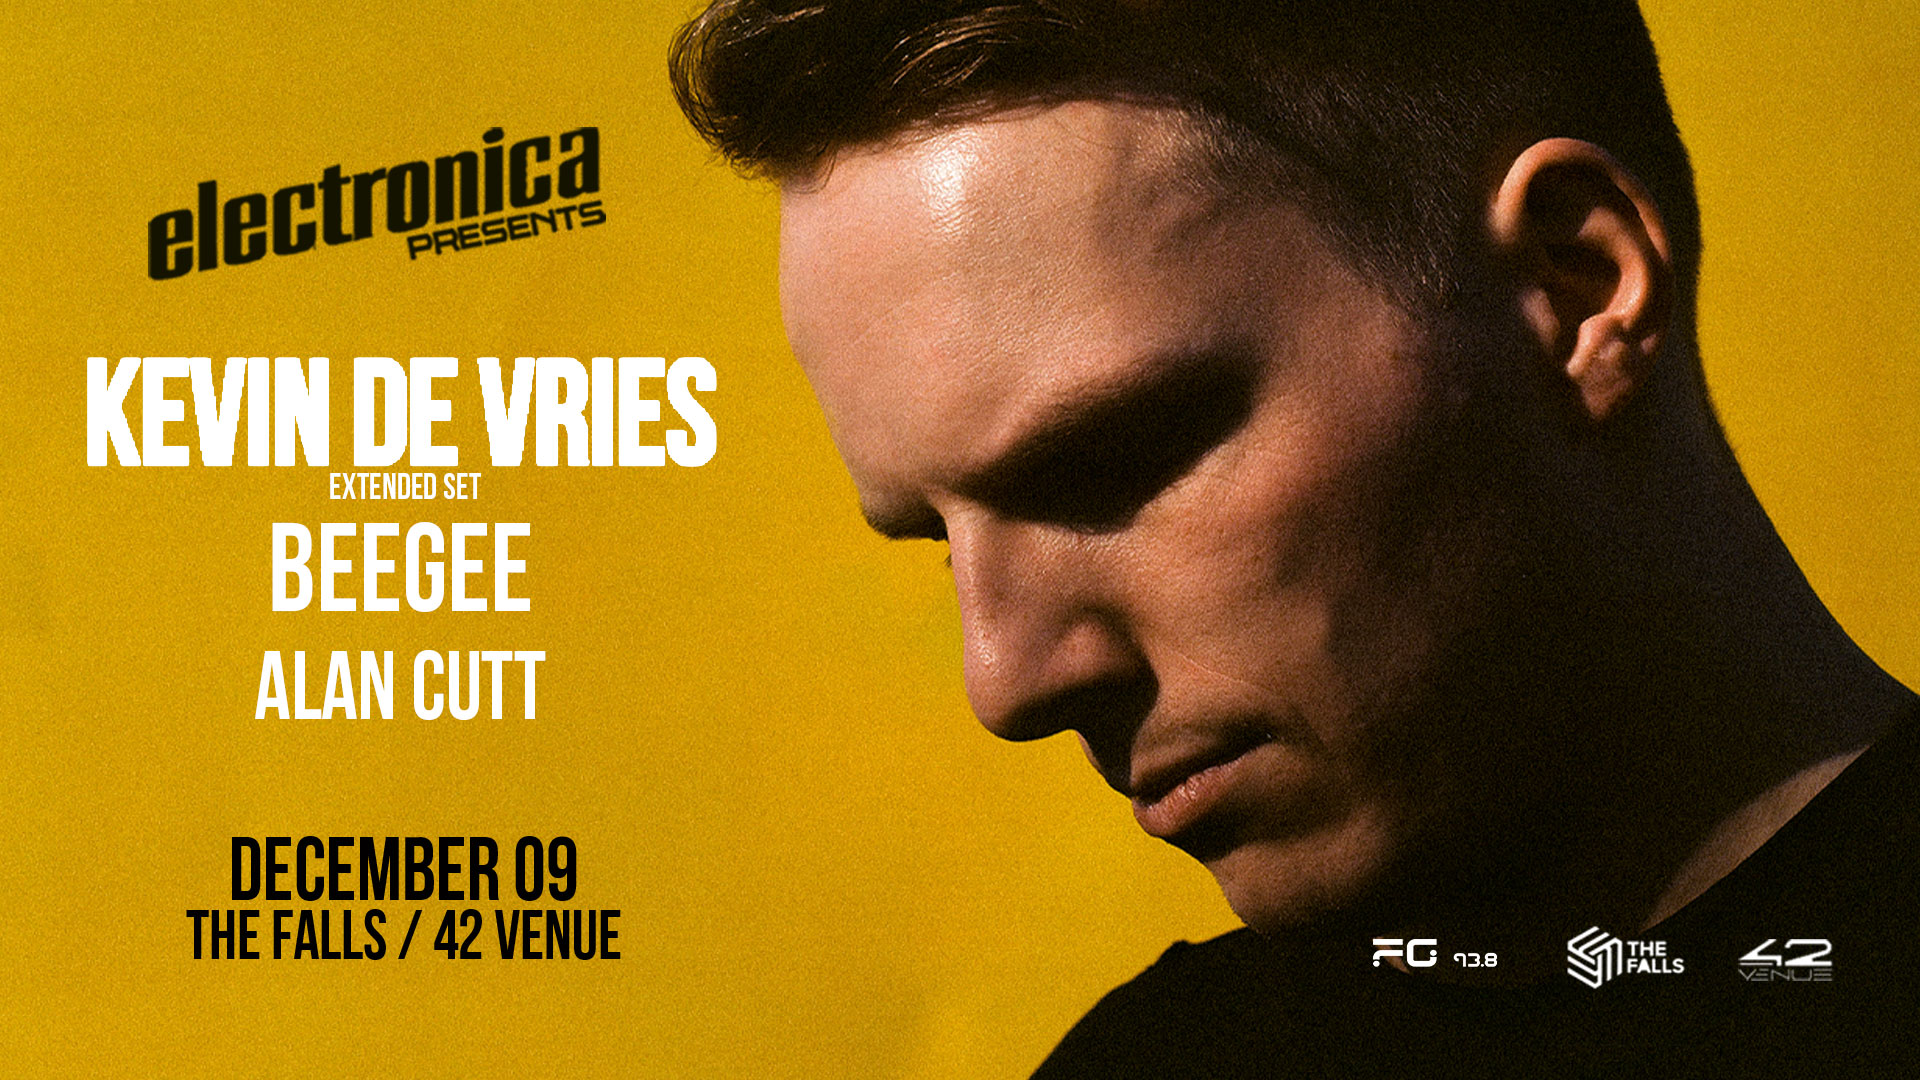 Electronica Presents: Kevin De Vries and BeeGee hosted by Alan Cutt